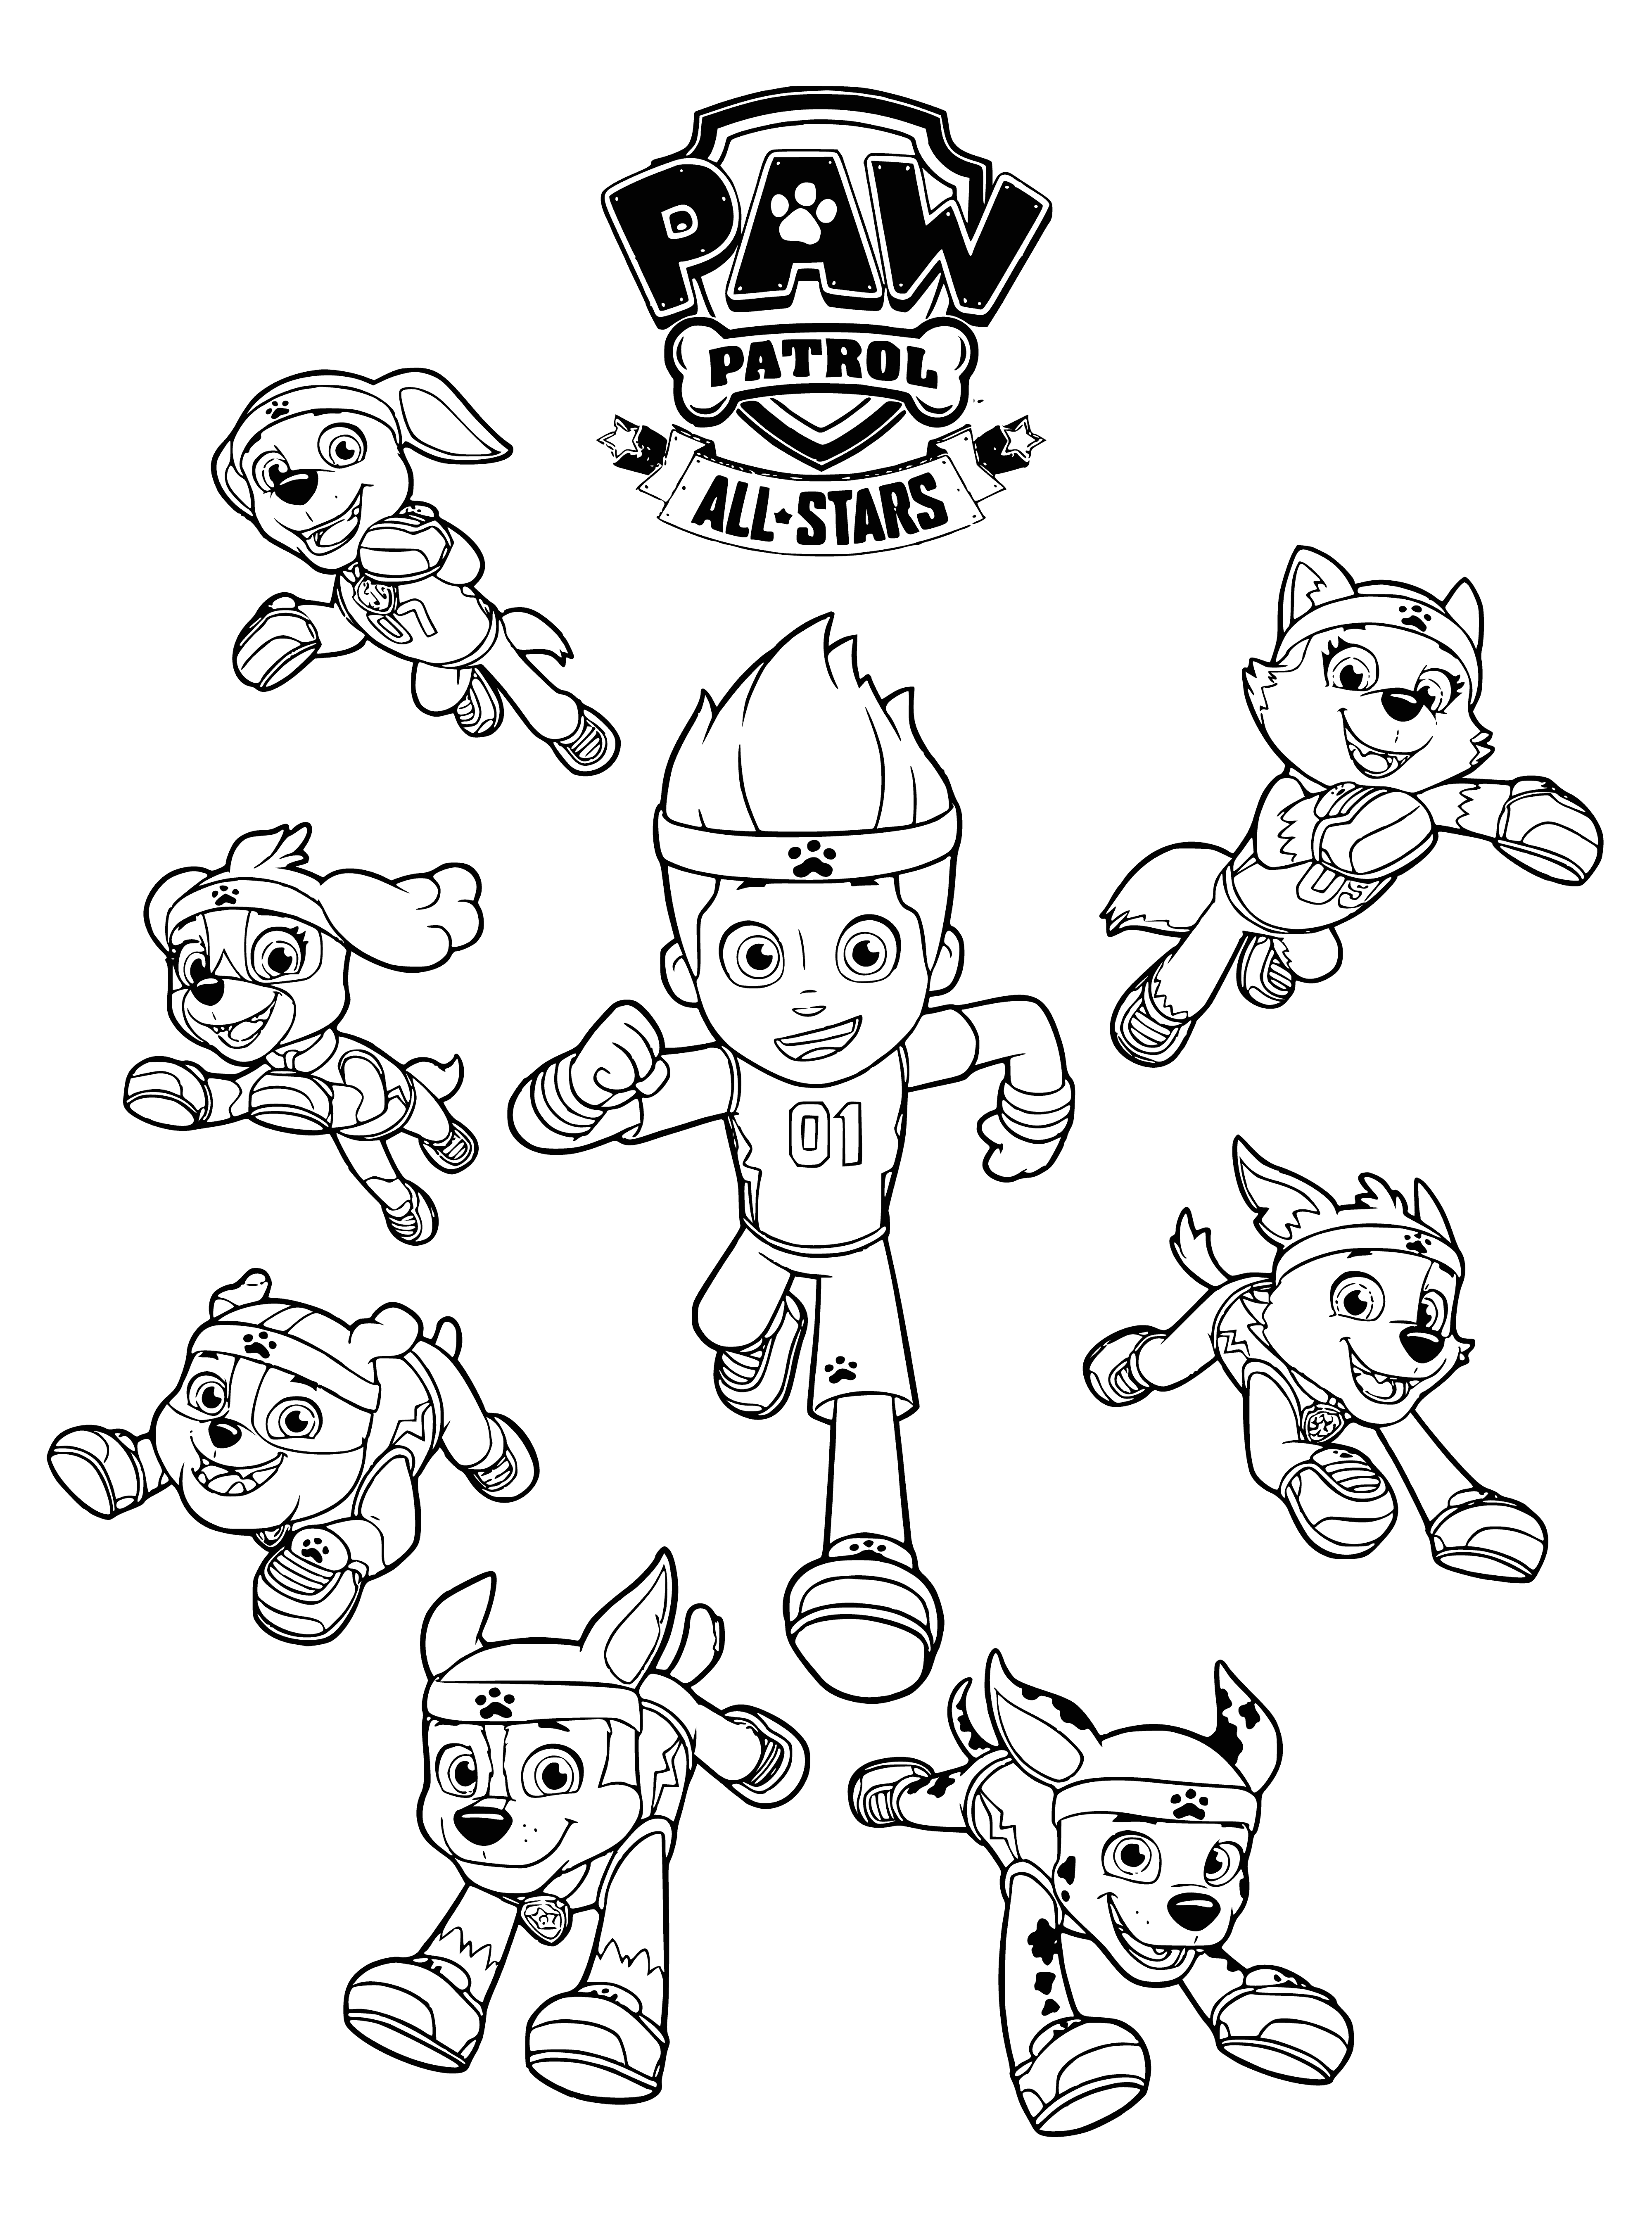 All Stars coloring page